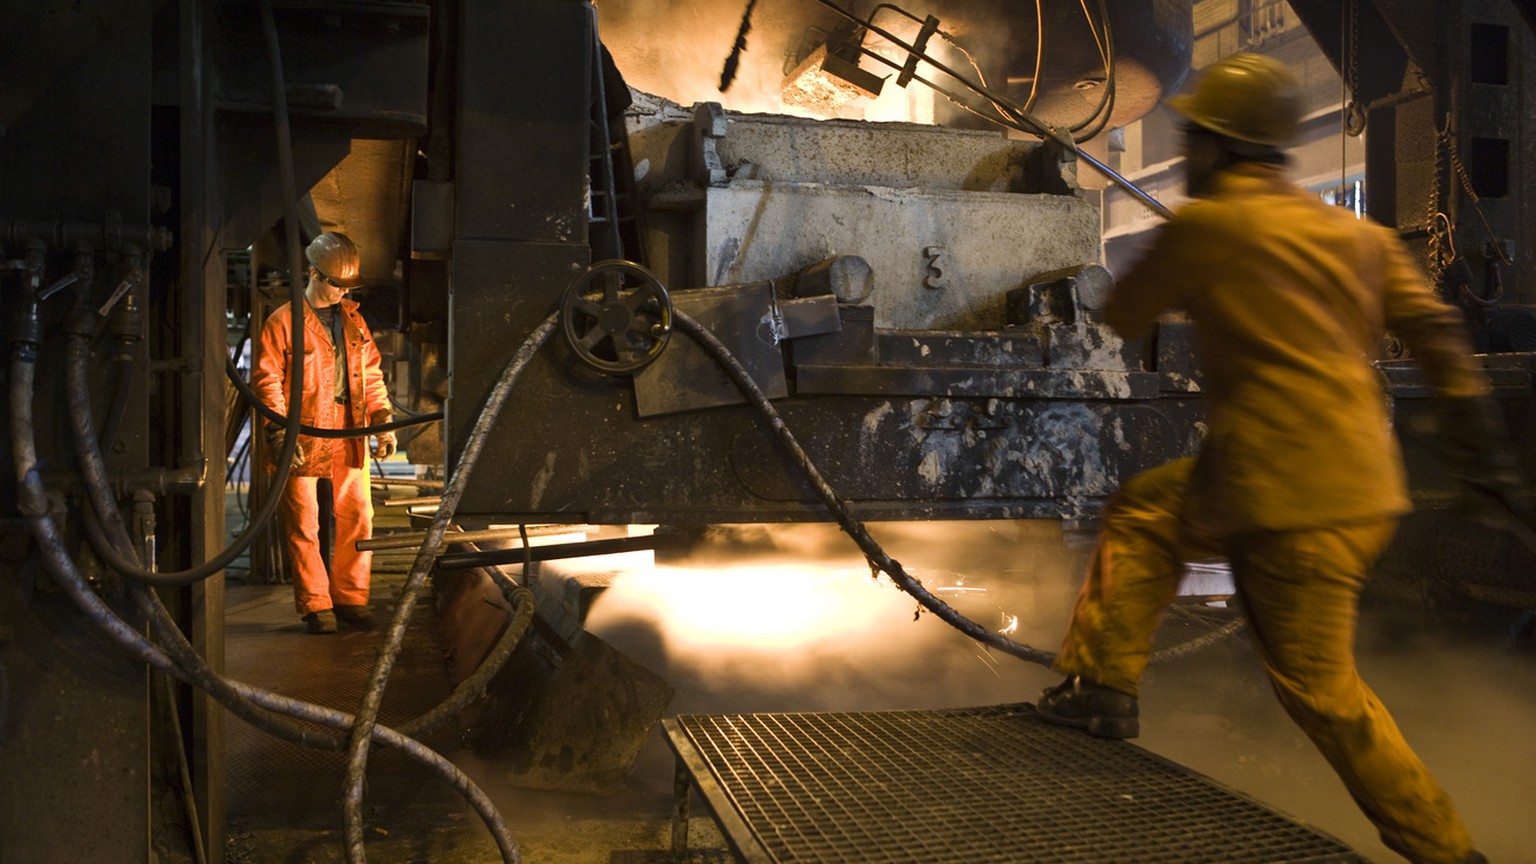 Employees of Stahl Gerlafingen Ltd. heat up scrap metal in a mealting furnace in the production facility hall in Gerlafingen in the canton of Solothurn, Switzerland, pictured on November 14, 2008. The ...